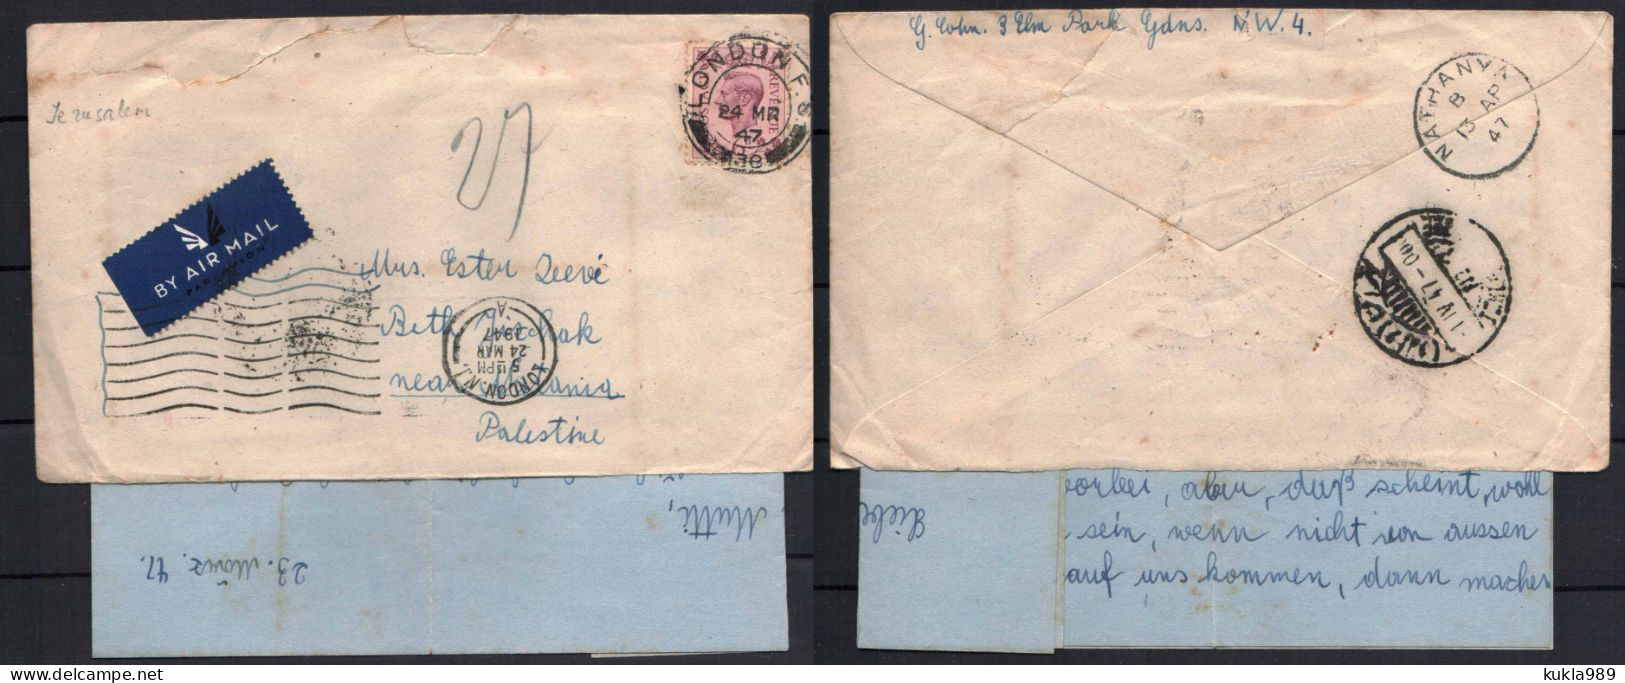 JUDAICA GB STAMPS.  1954 COVER + LETTER (YIDDYSH)TO GERMANY - Lettres & Documents